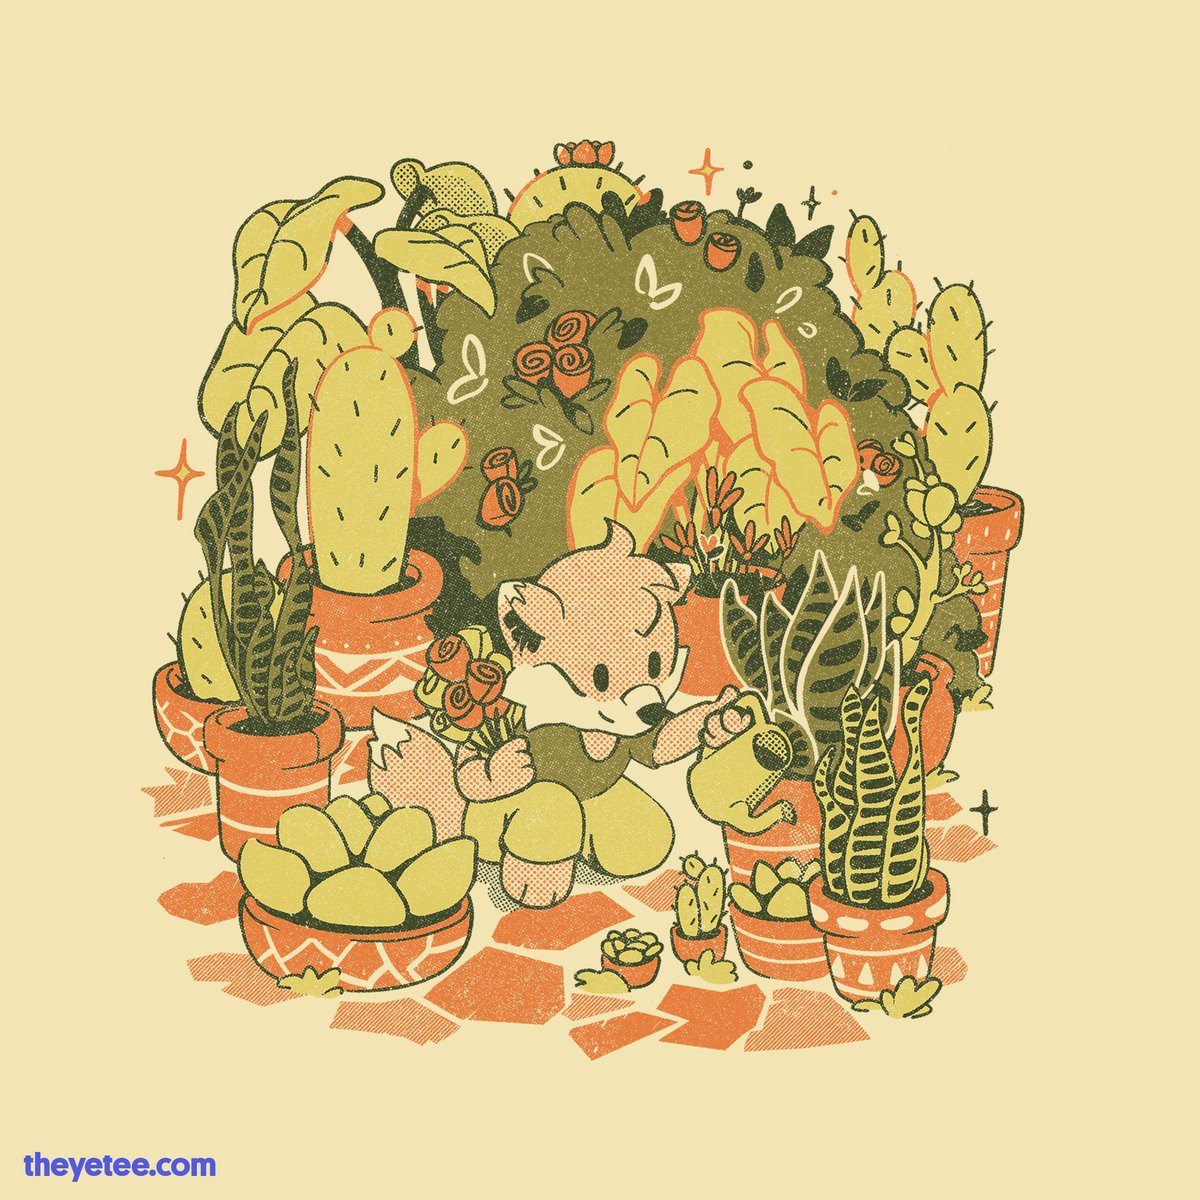 「Tender love and crops. Designed by Horta」|The Yetee 🌈のイラスト